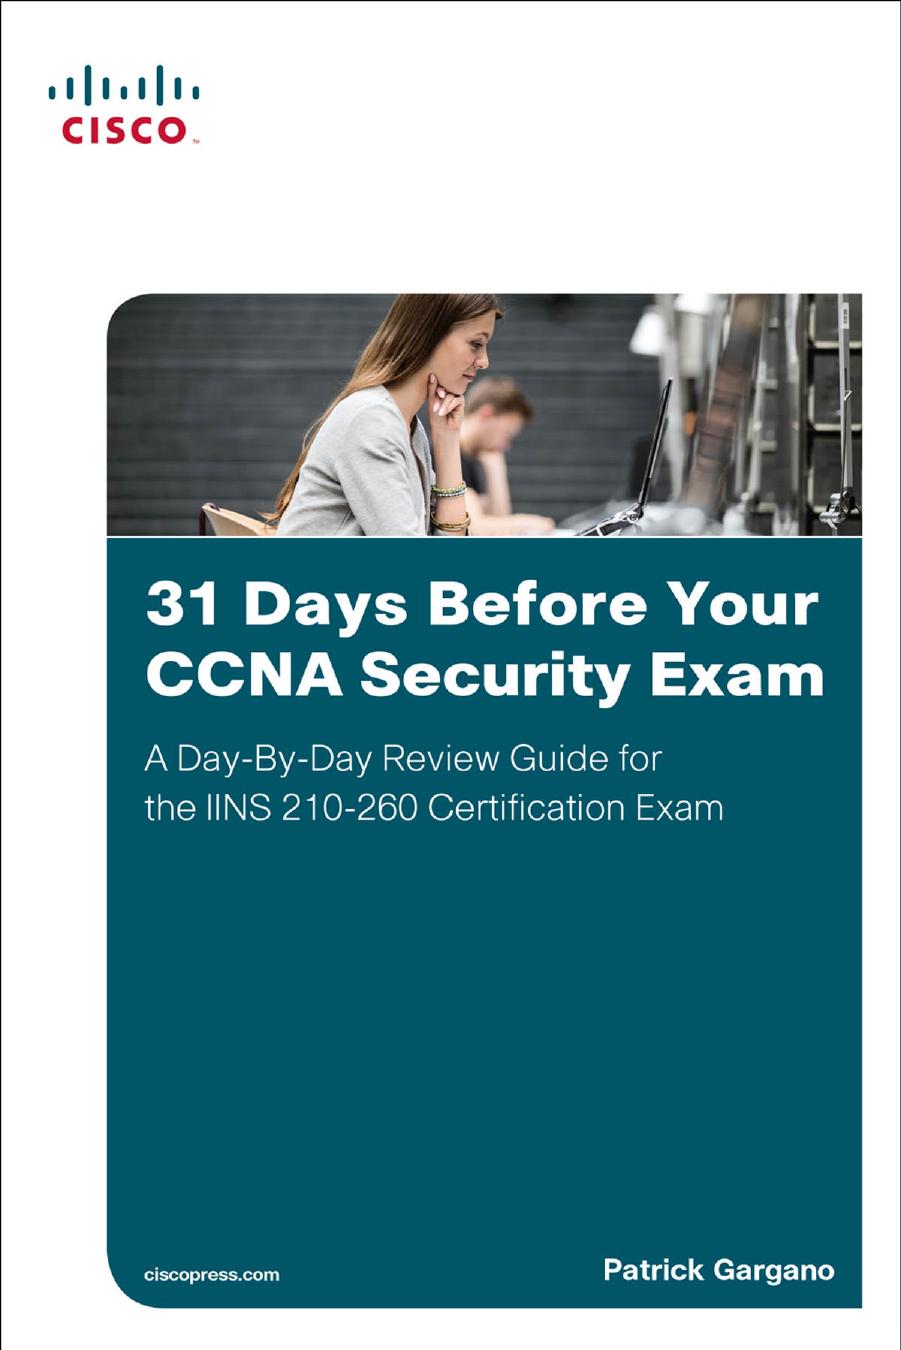 31 Days Before Your CCNA Security Exam: A Day-By-Day Review Guide for the IINS 210-260 Certification Exam by Patrick Gargano